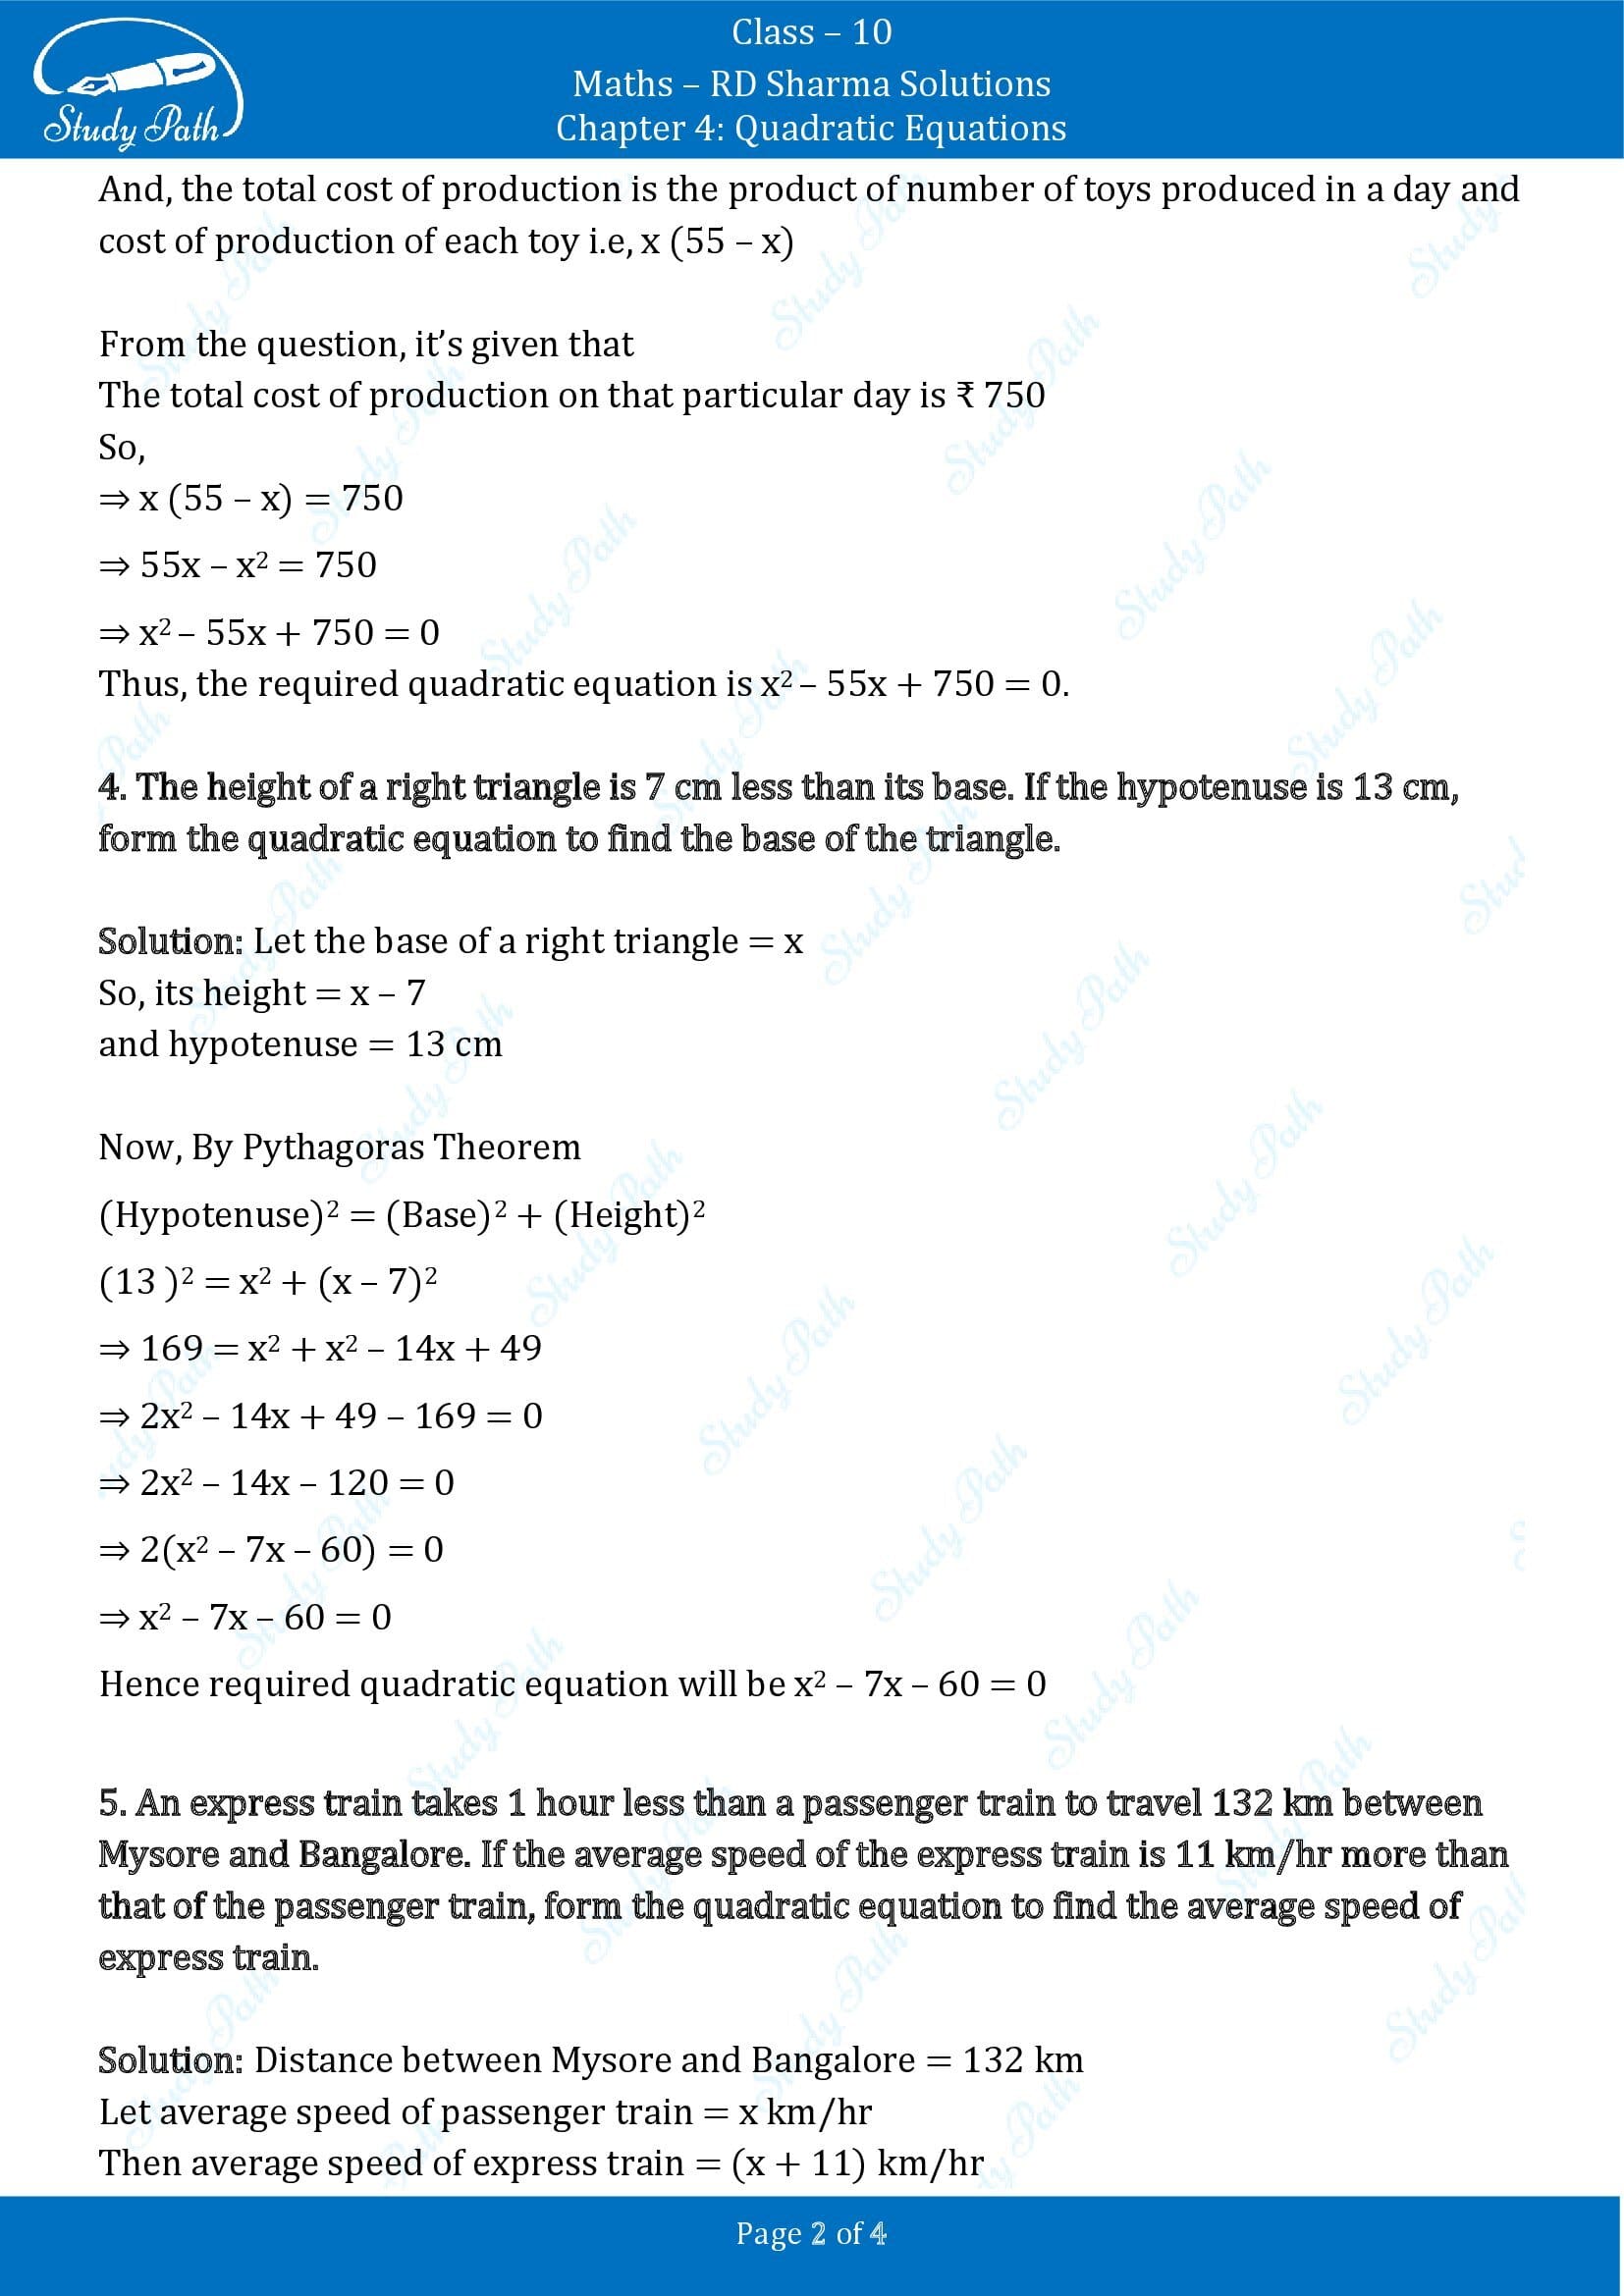 RD Sharma Solutions Class 10 Chapter 4 Quadratic Equations Exercise 4.2 0002